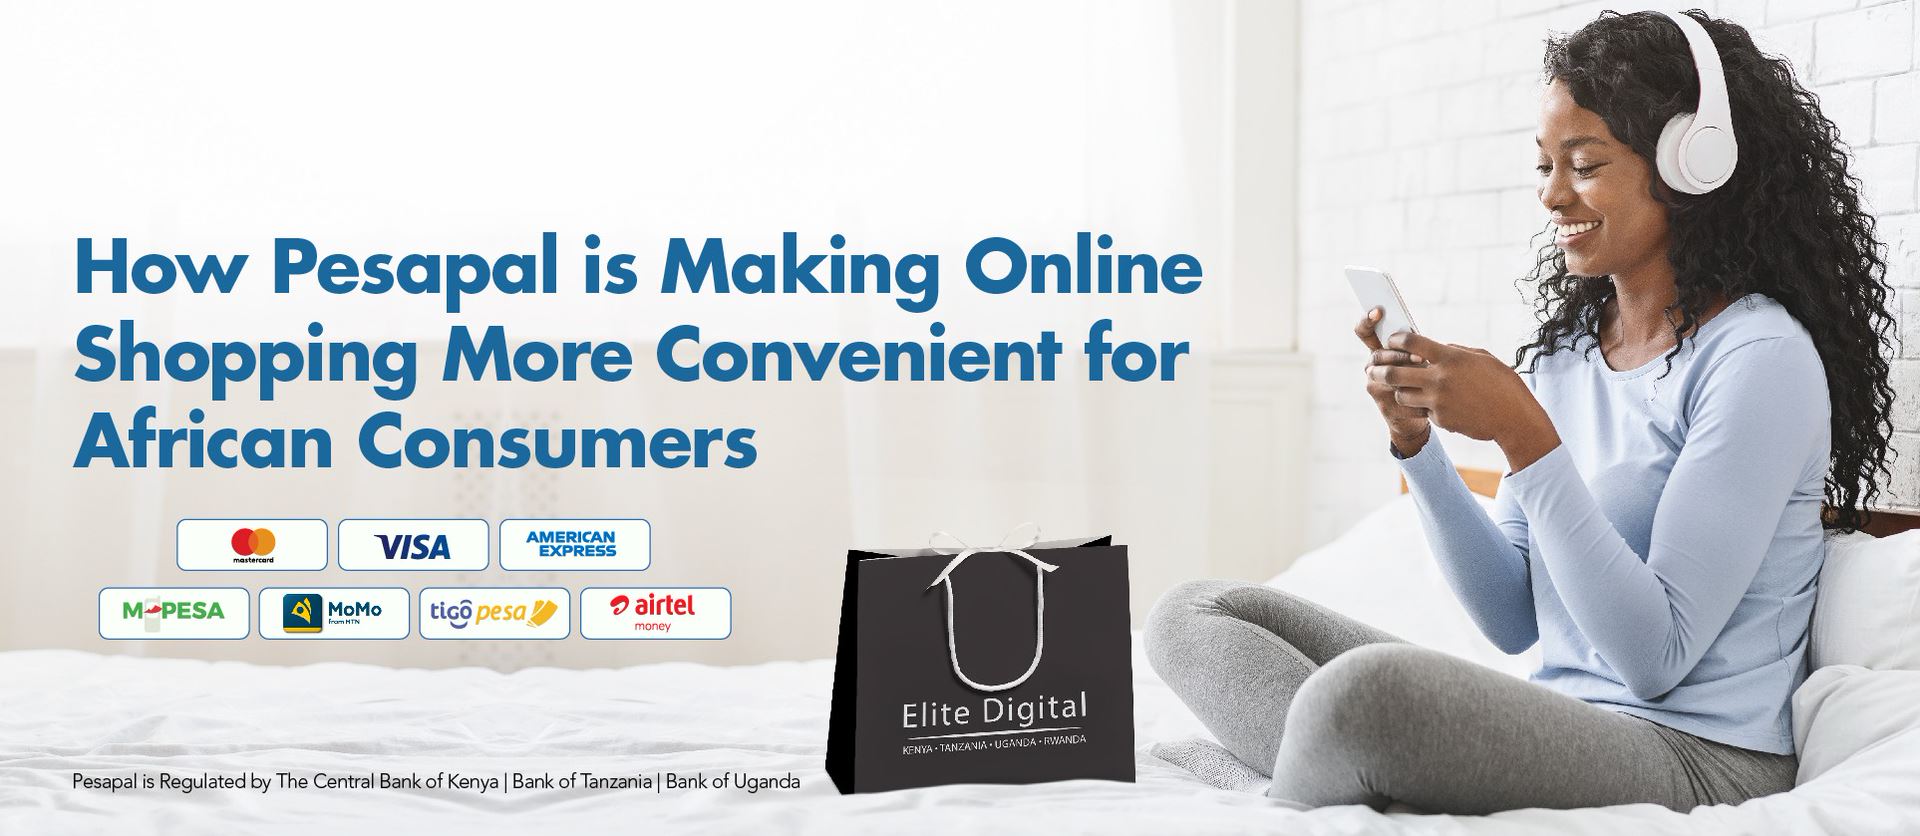 How Pesapal is Making Online Shopping More Convenient for African Consumers